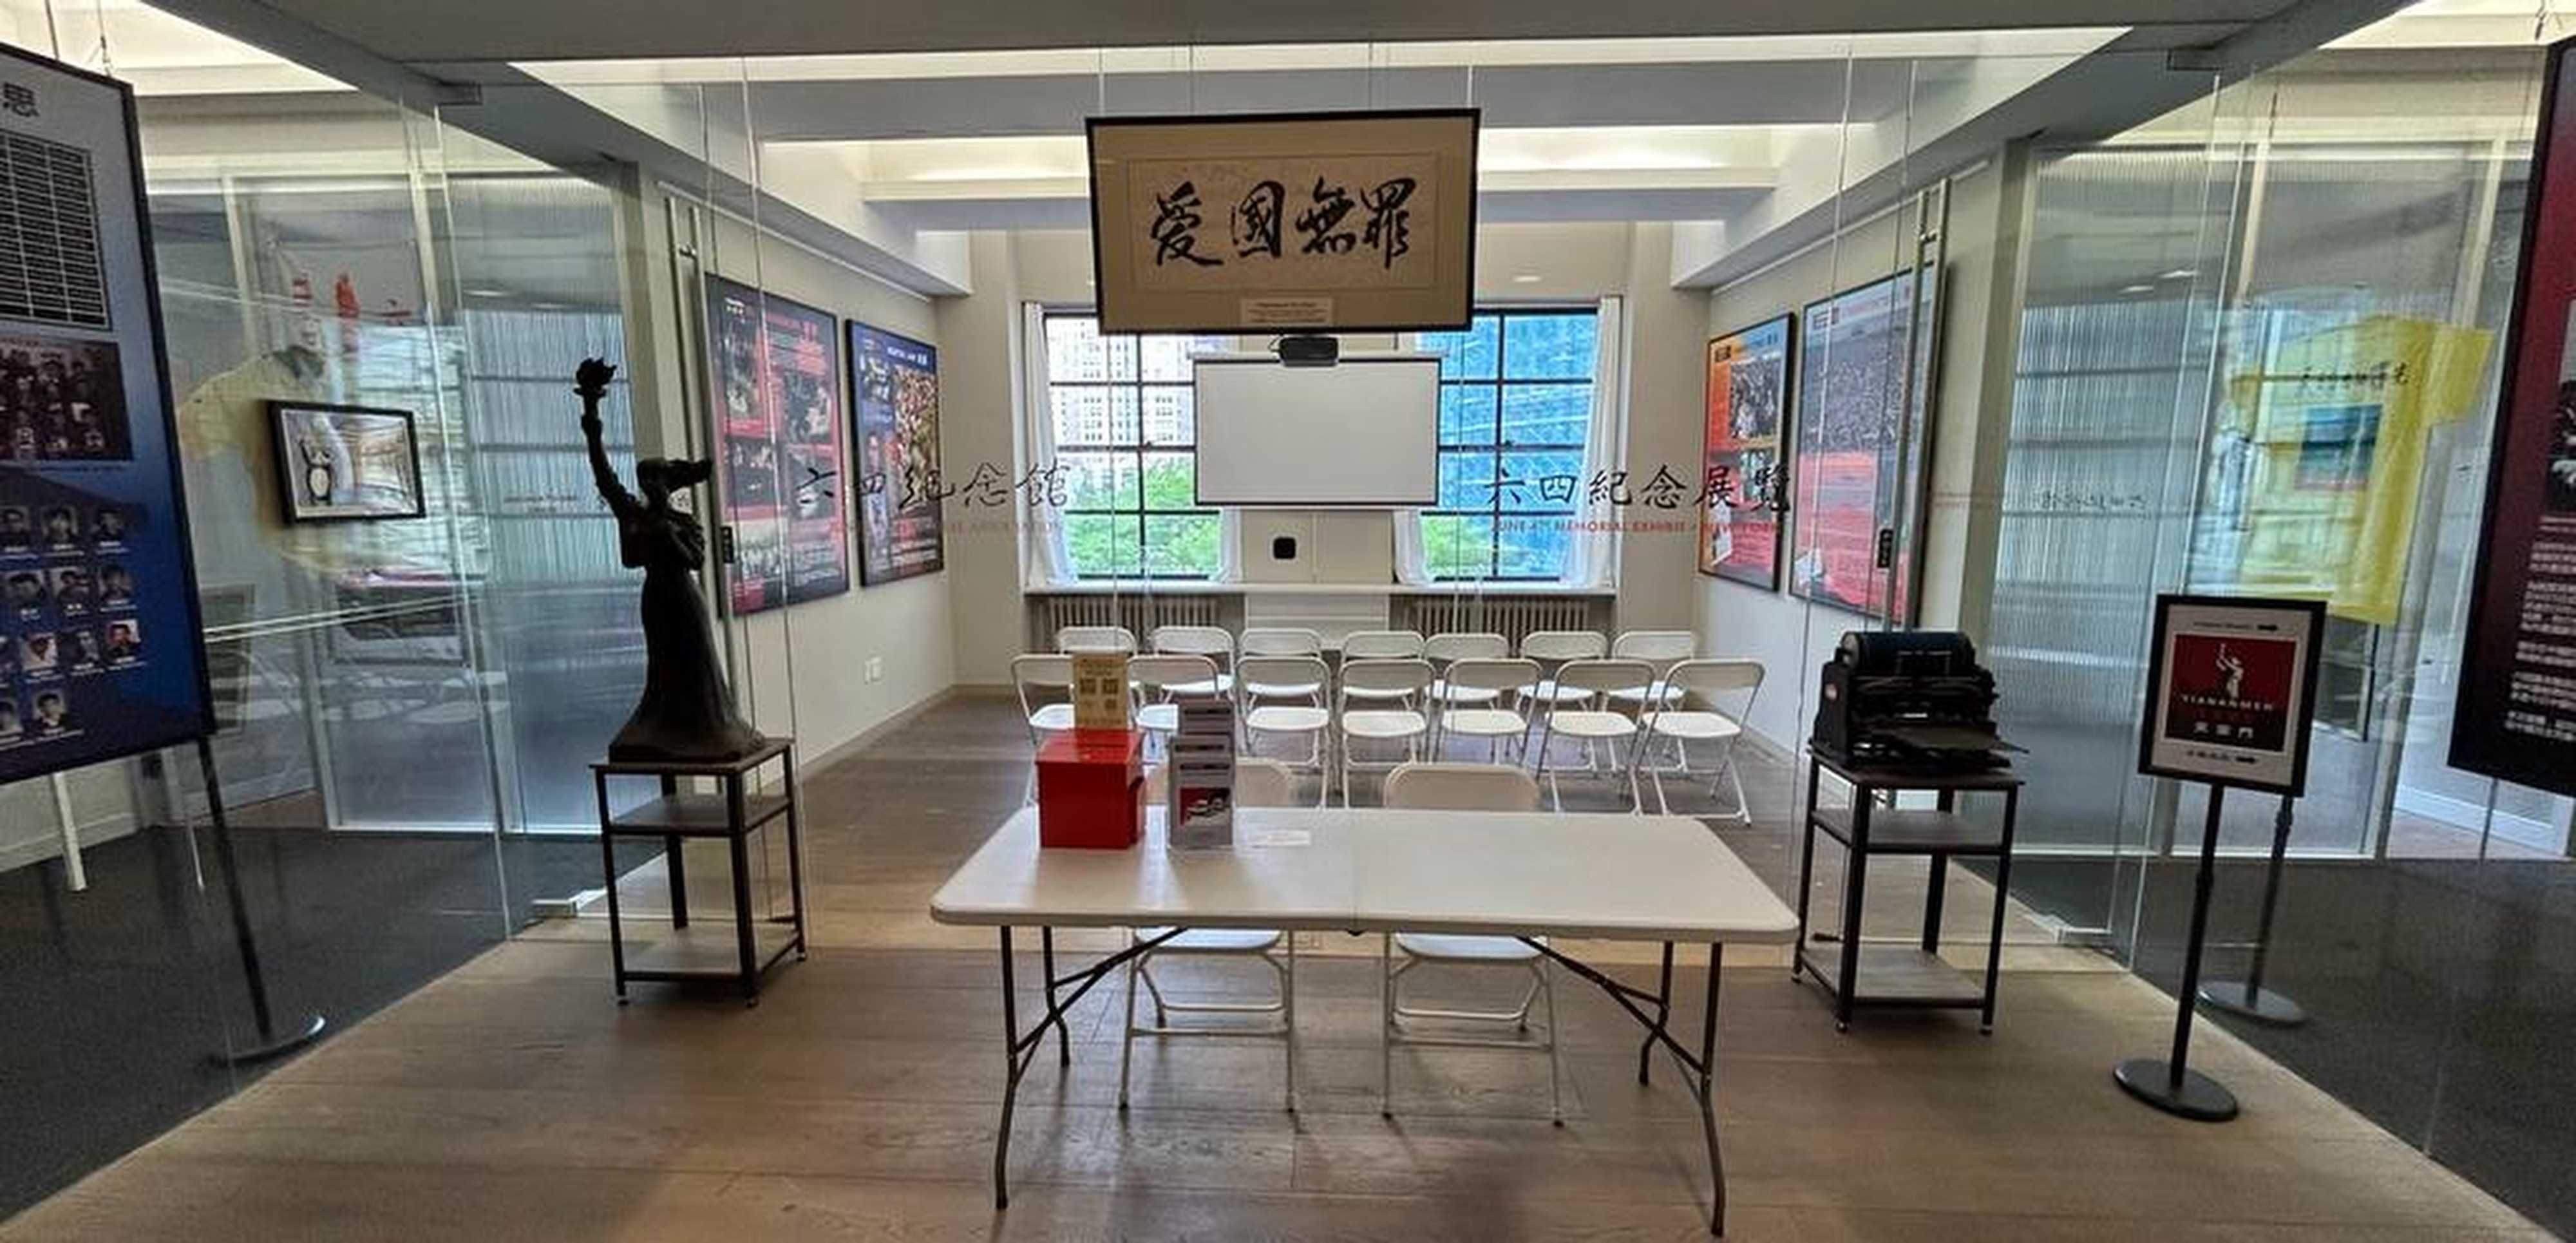 The new June 4 museum in New York is aimed at a global audience, even though organisers concede fewer mainlanders will view it compared with the Hong Kong version. Photo: Handout